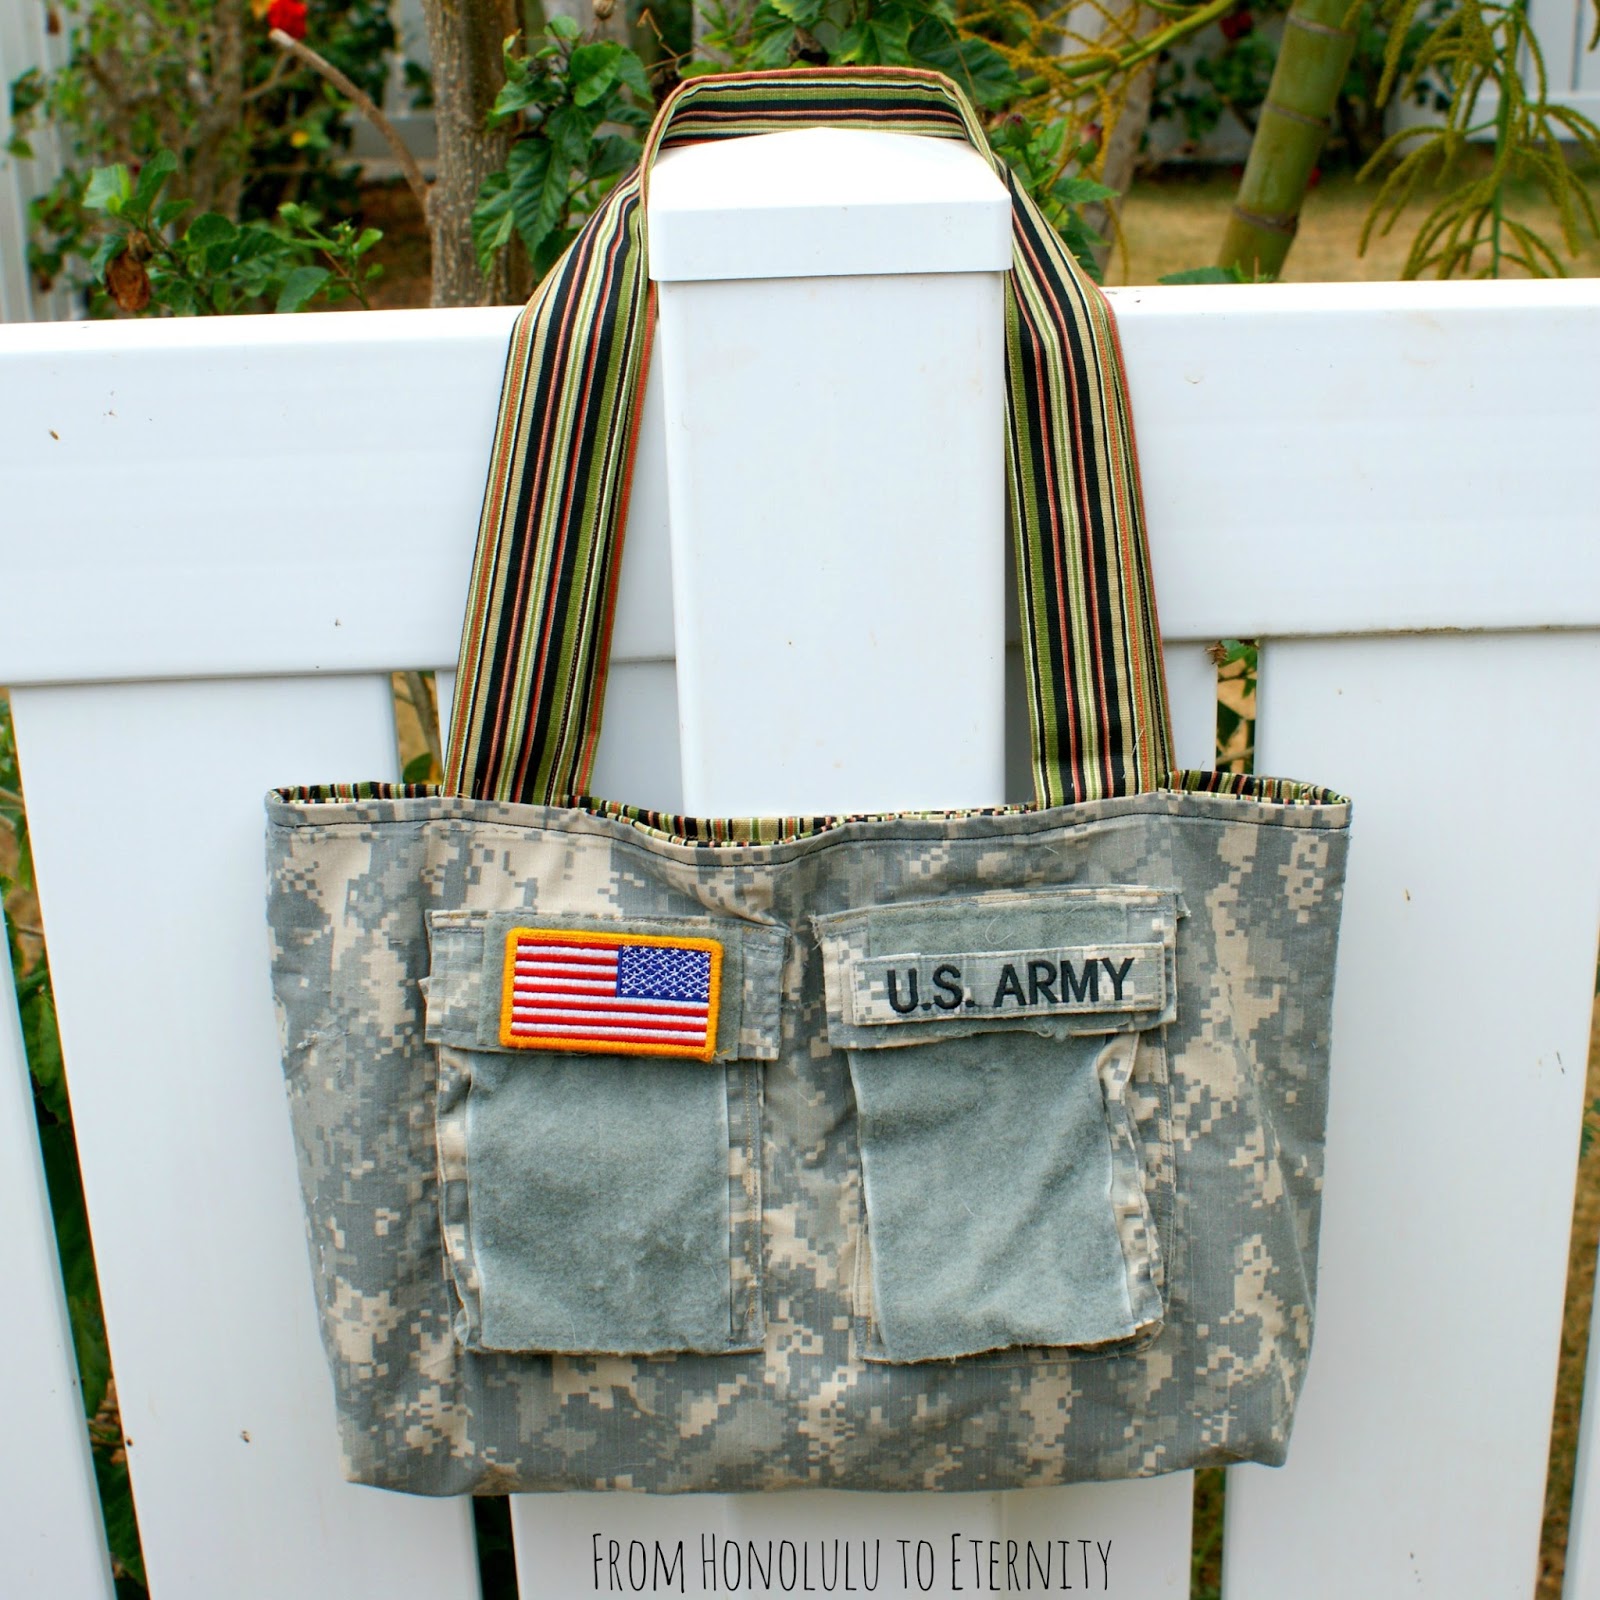 ve finally gotten around to sewing myself a tote bag from an old ACU ...